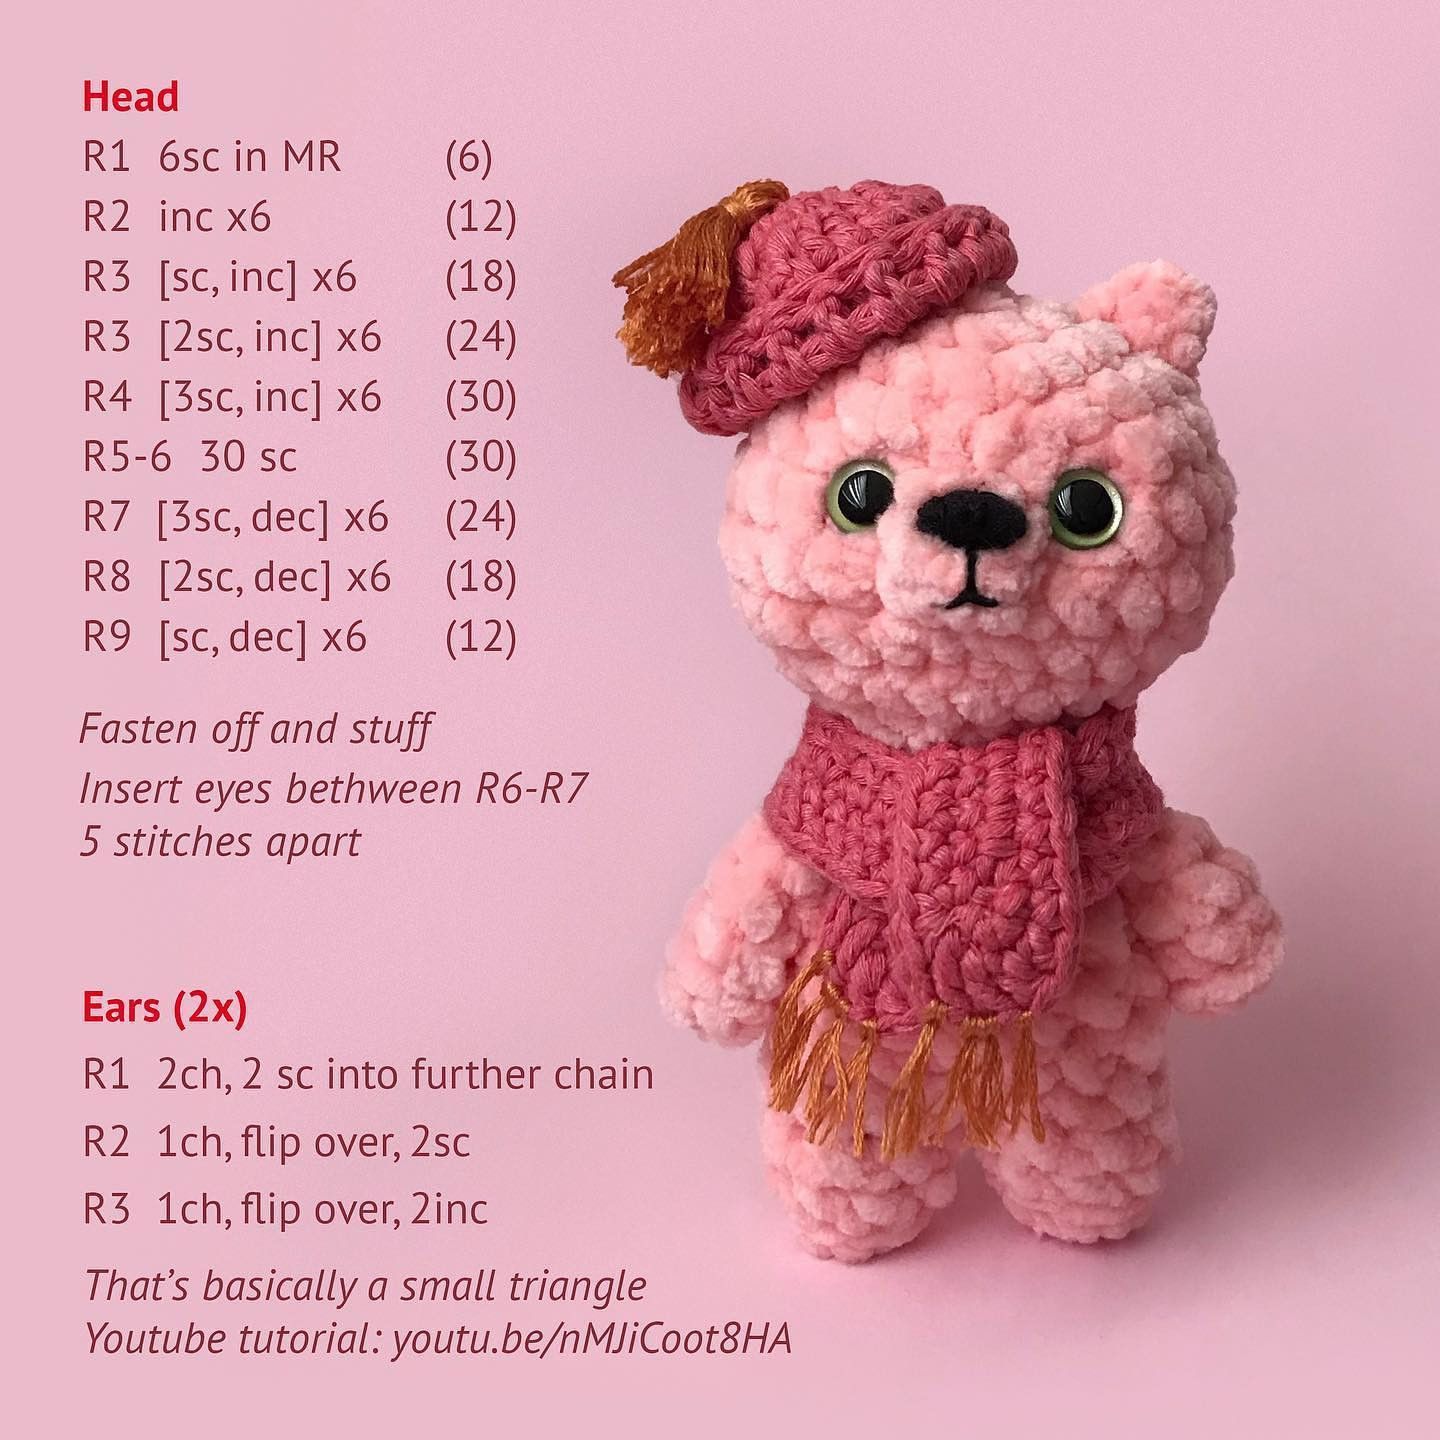 Crochet pattern of a pink bear wearing a hat and a scarf